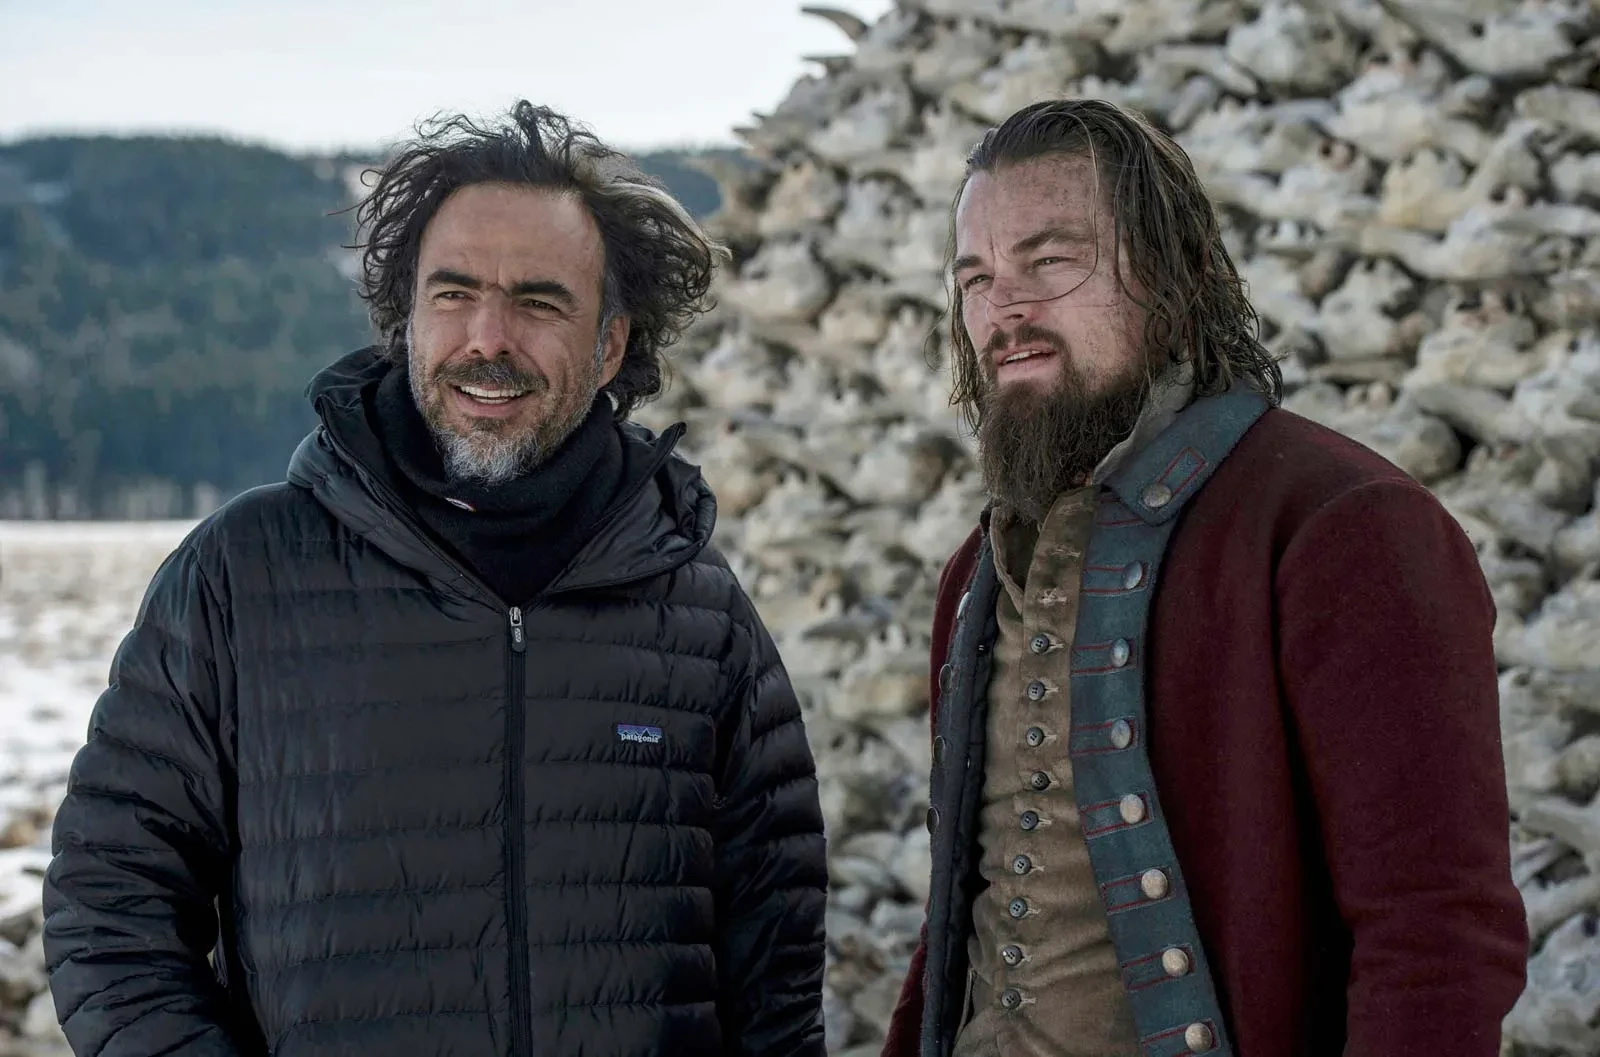 Alejandro G. Iñárritu, who made Leonardo DiCaprio's Oscar win possible in The Revenant, will look to achieve the same for Tom Cruise